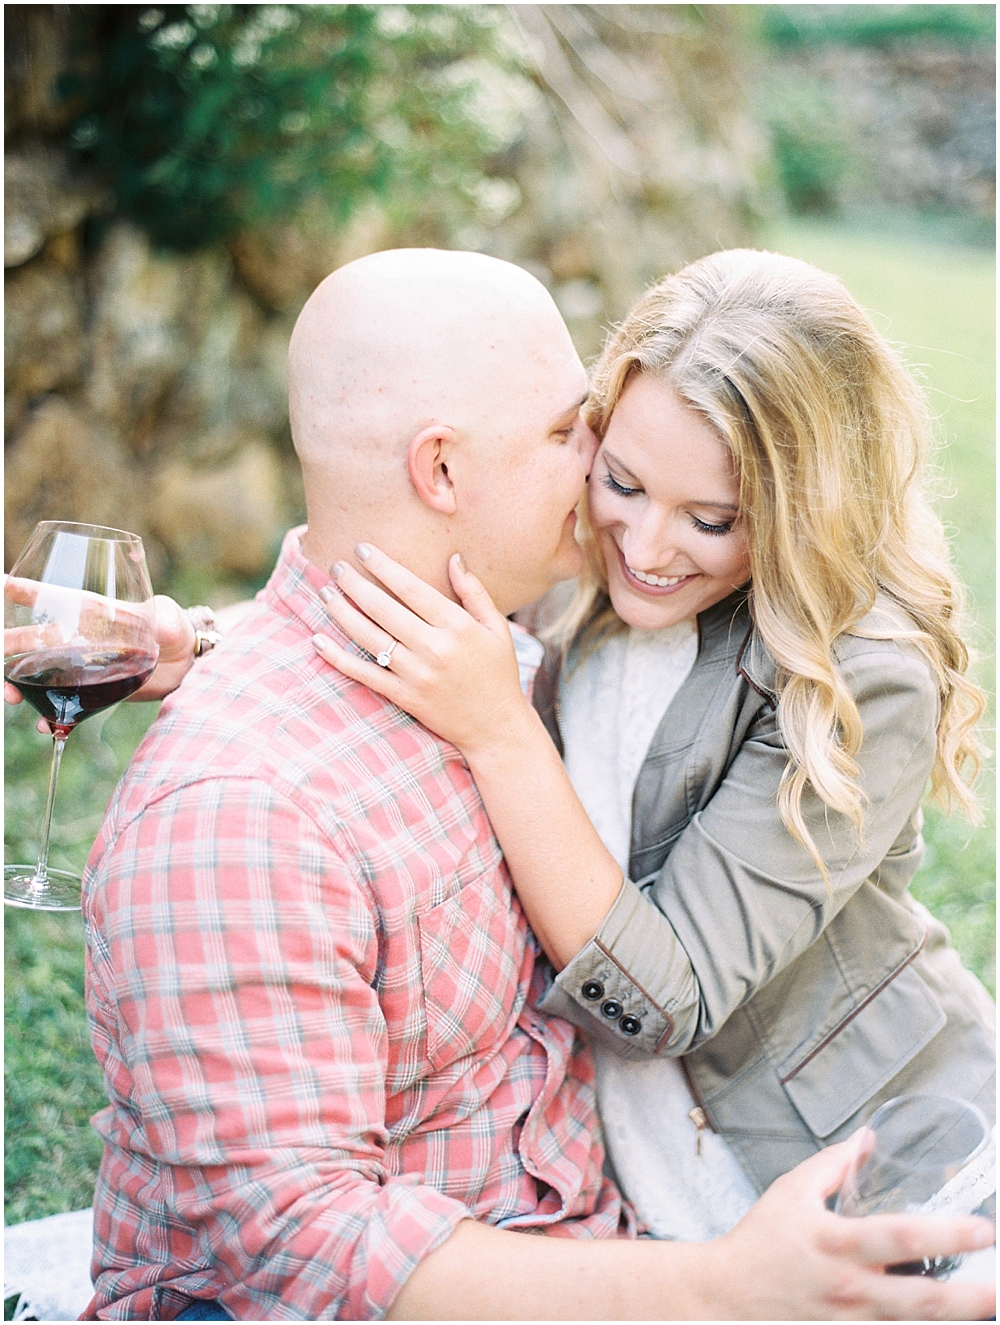 Romantic picnic with wine for an engagement session